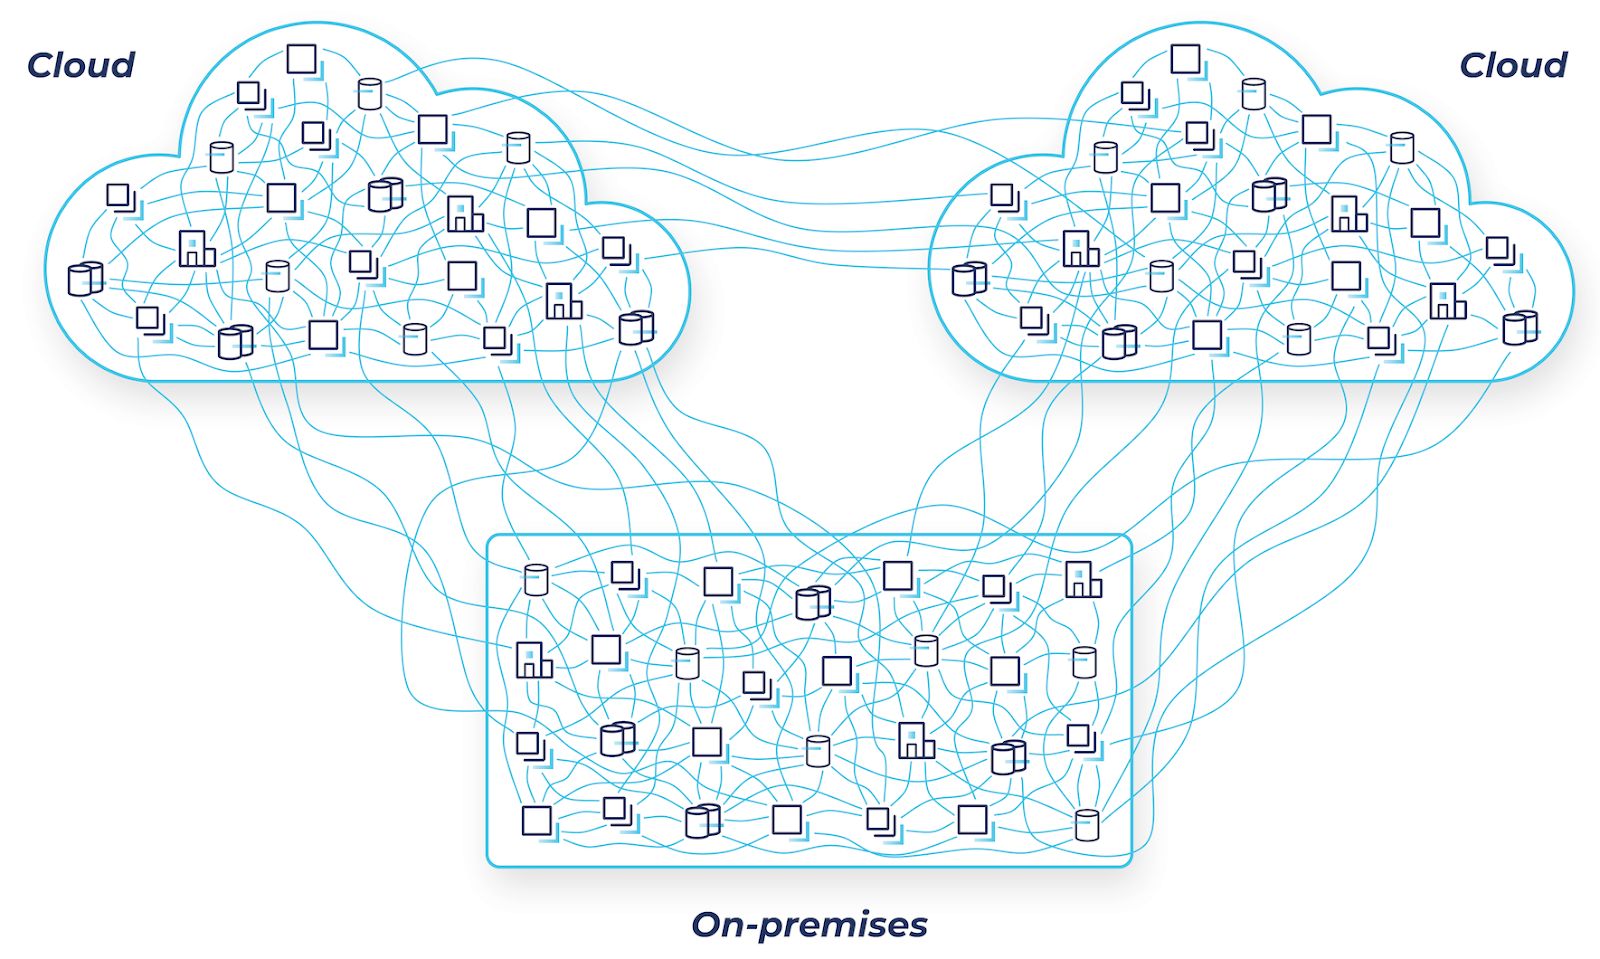 Hybrid cloud and on-premises architecture